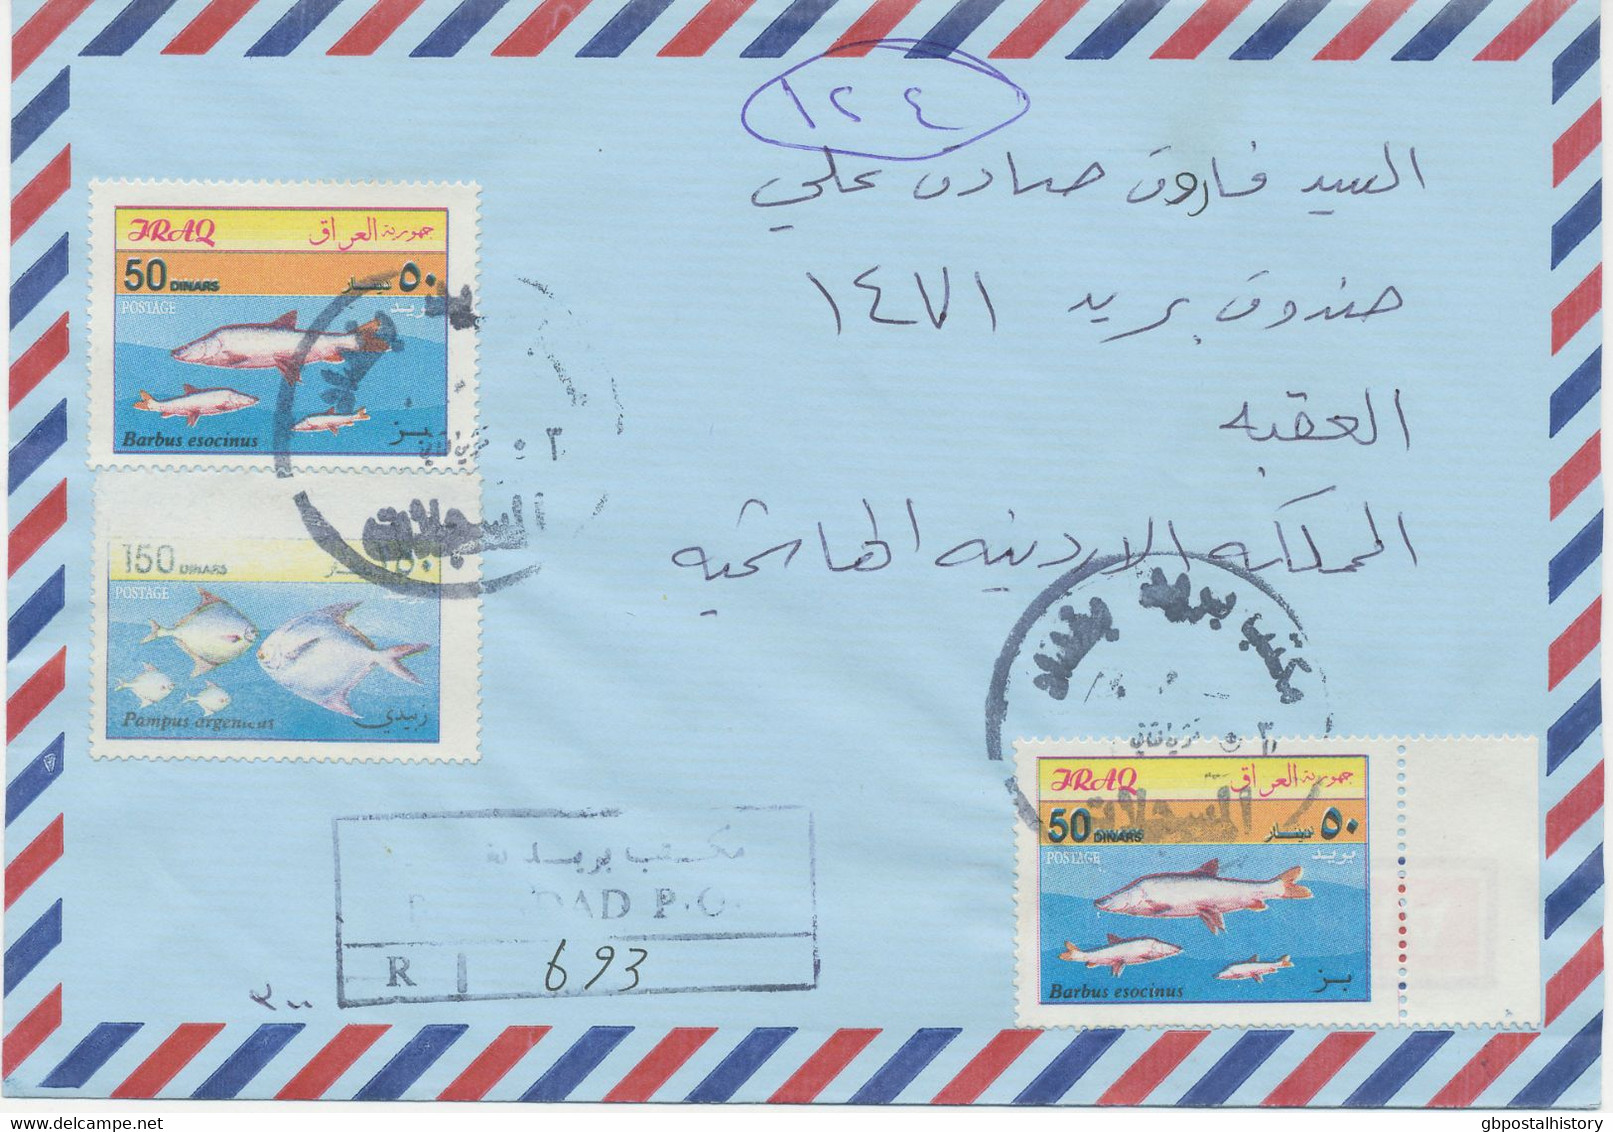 IRAQ 2001, Fish 25D, 50D And 150D Together With Football 25D On Superb Registered Airmail Cover, MAJOR ERROR & VARIETY: - Iraq